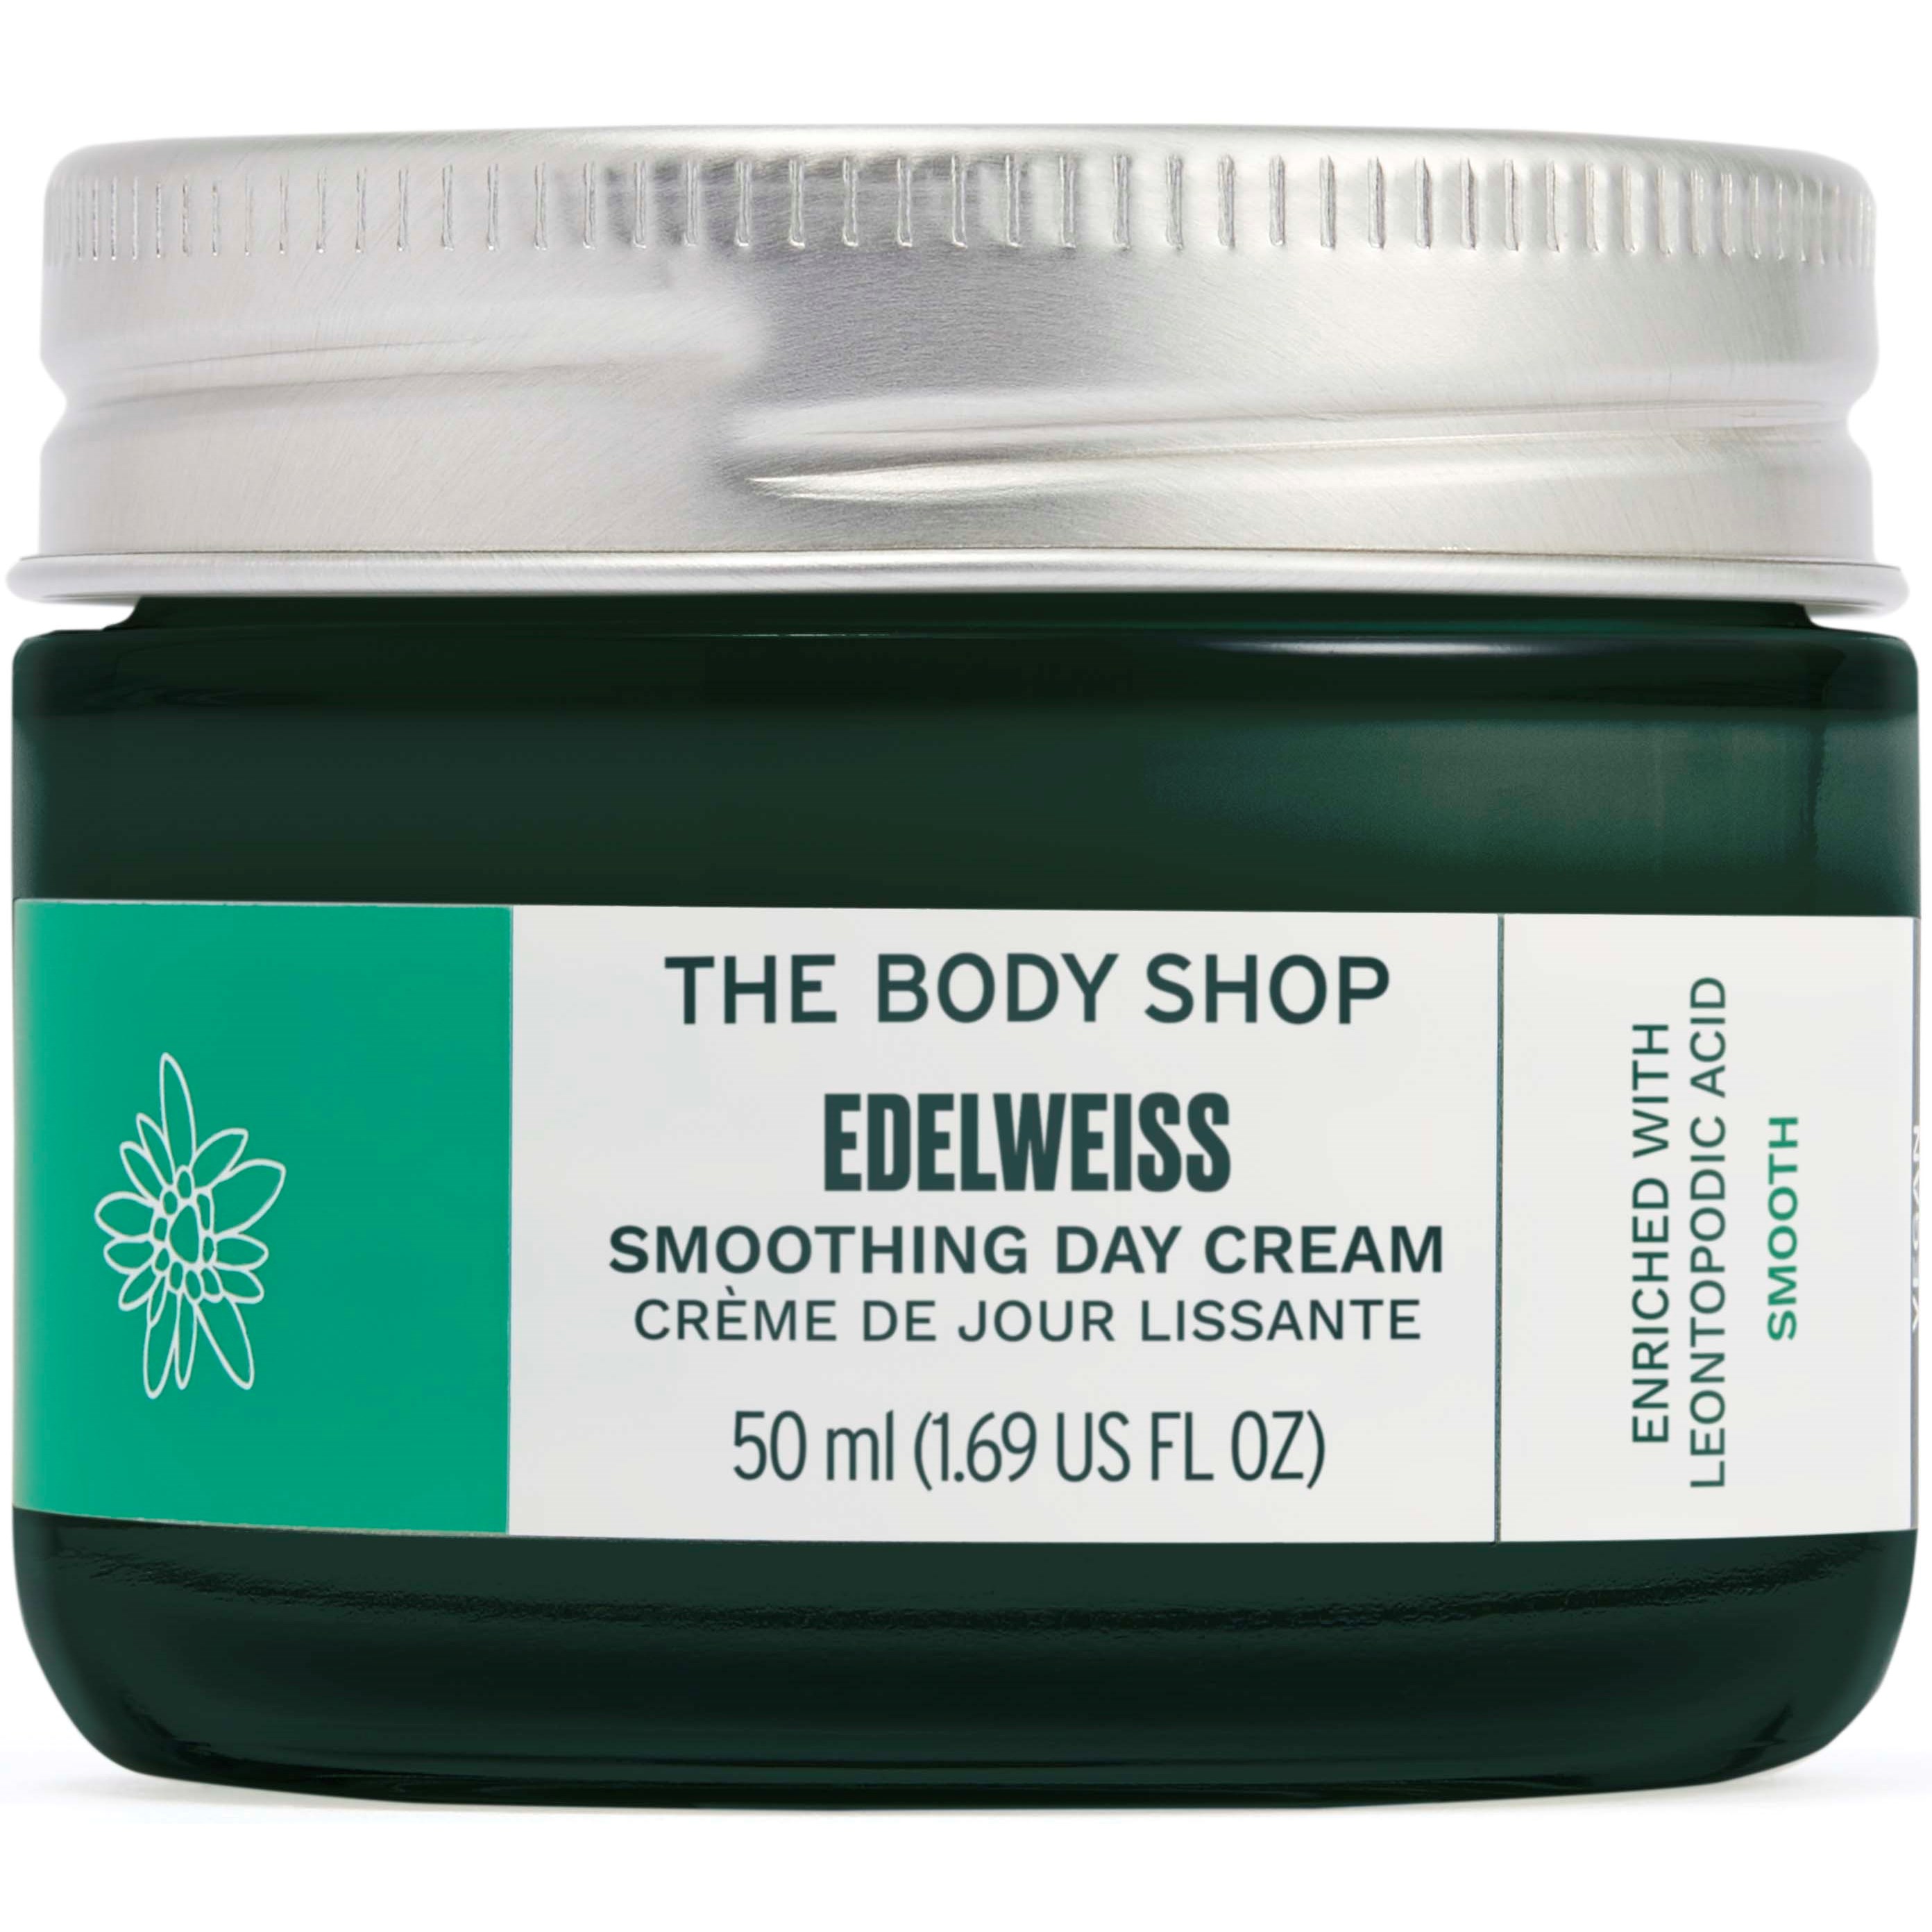 The Body Shop Edelweiss Smoothing Day Cream 50 ml